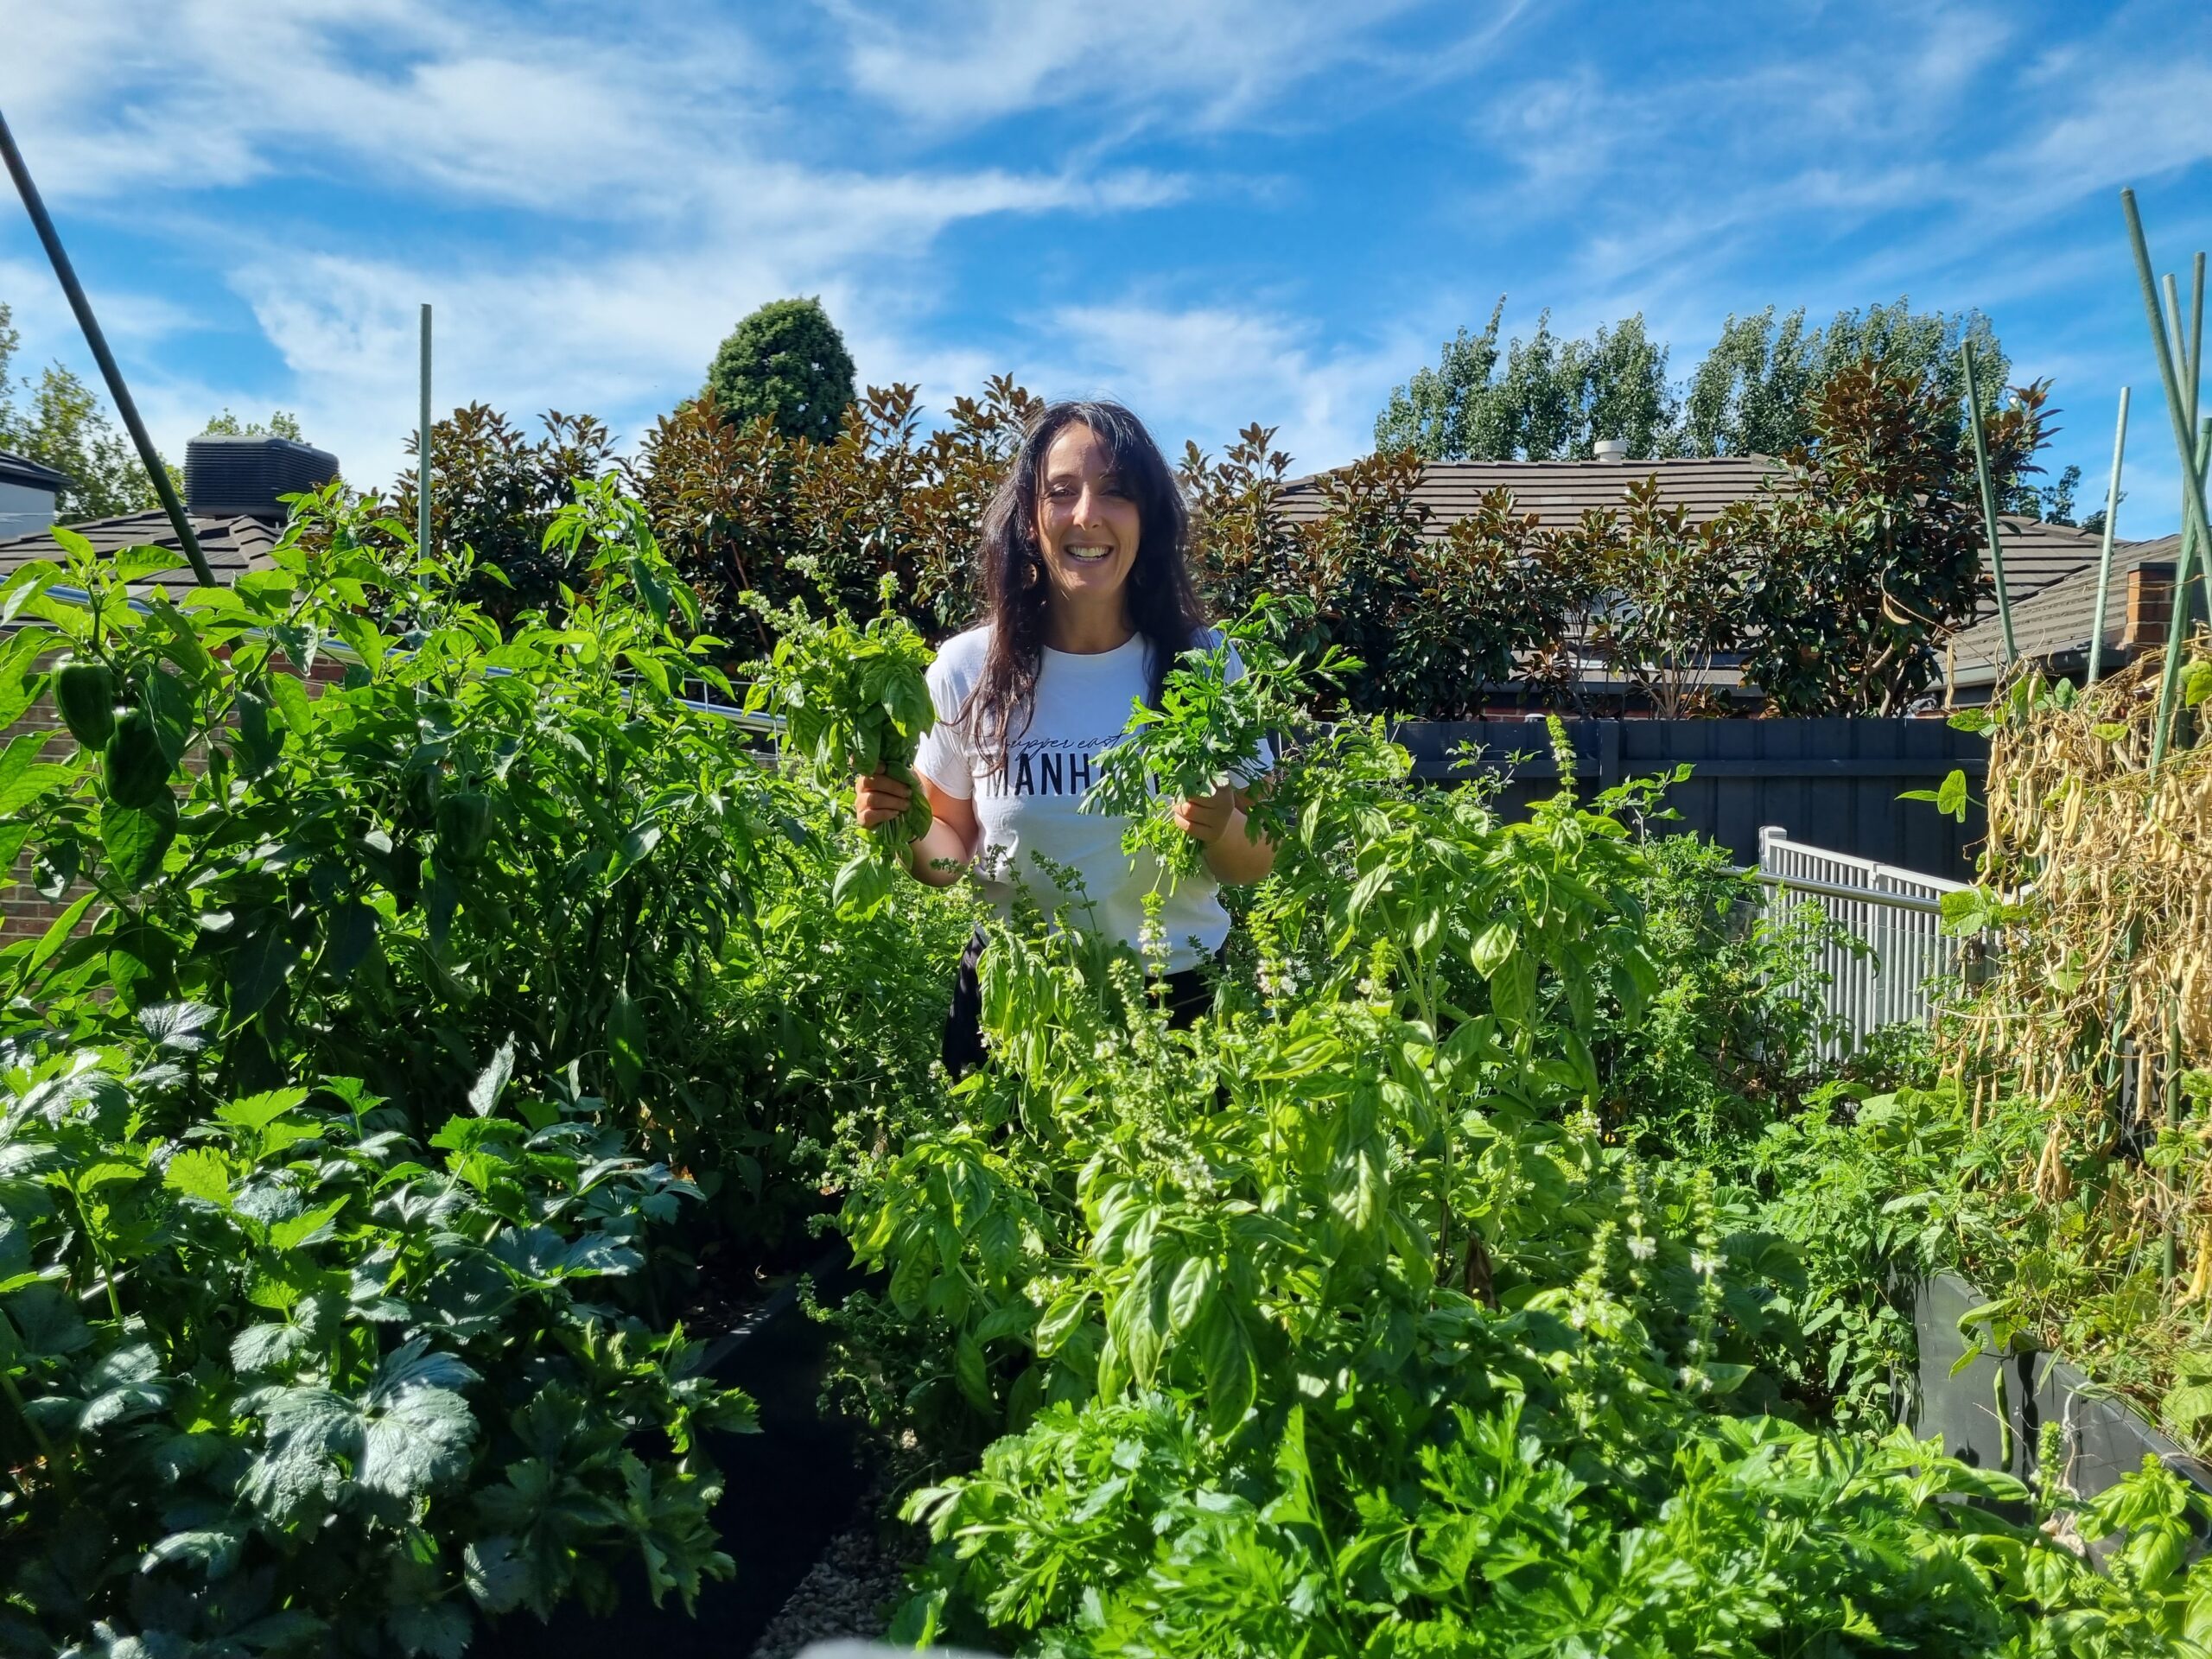 Catherine stands in a lush backyard veggie patch, in a white t-shirt with Manhattan written on the chest in black. She smiles happily holding up cuttings of basil in amongst shoulder height basil, capsicum, and tomato plants.